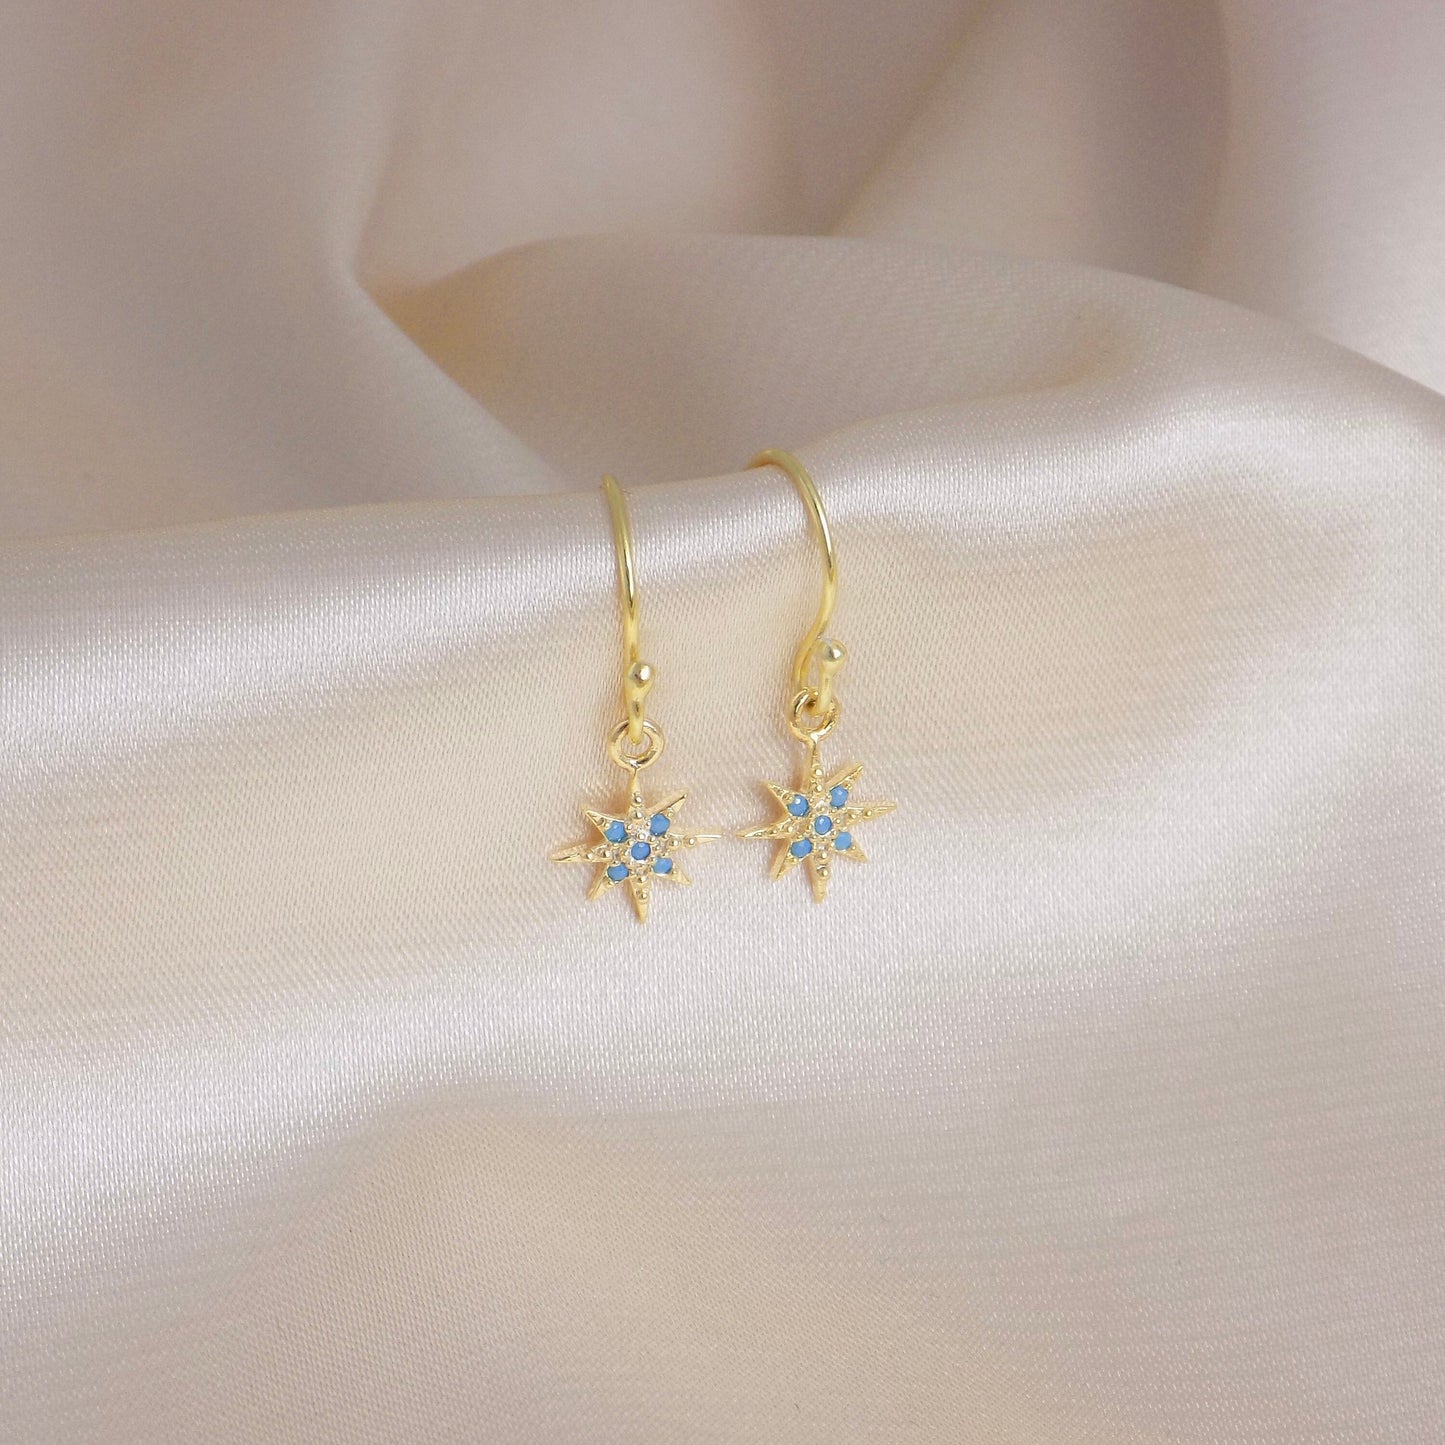 Tiny North Star Earrings Gold, Small Star Burst Drop Dangle Earring, Sparkly Turquoise Cubic Zirconia Stones, Gift For A Friend, M6-67